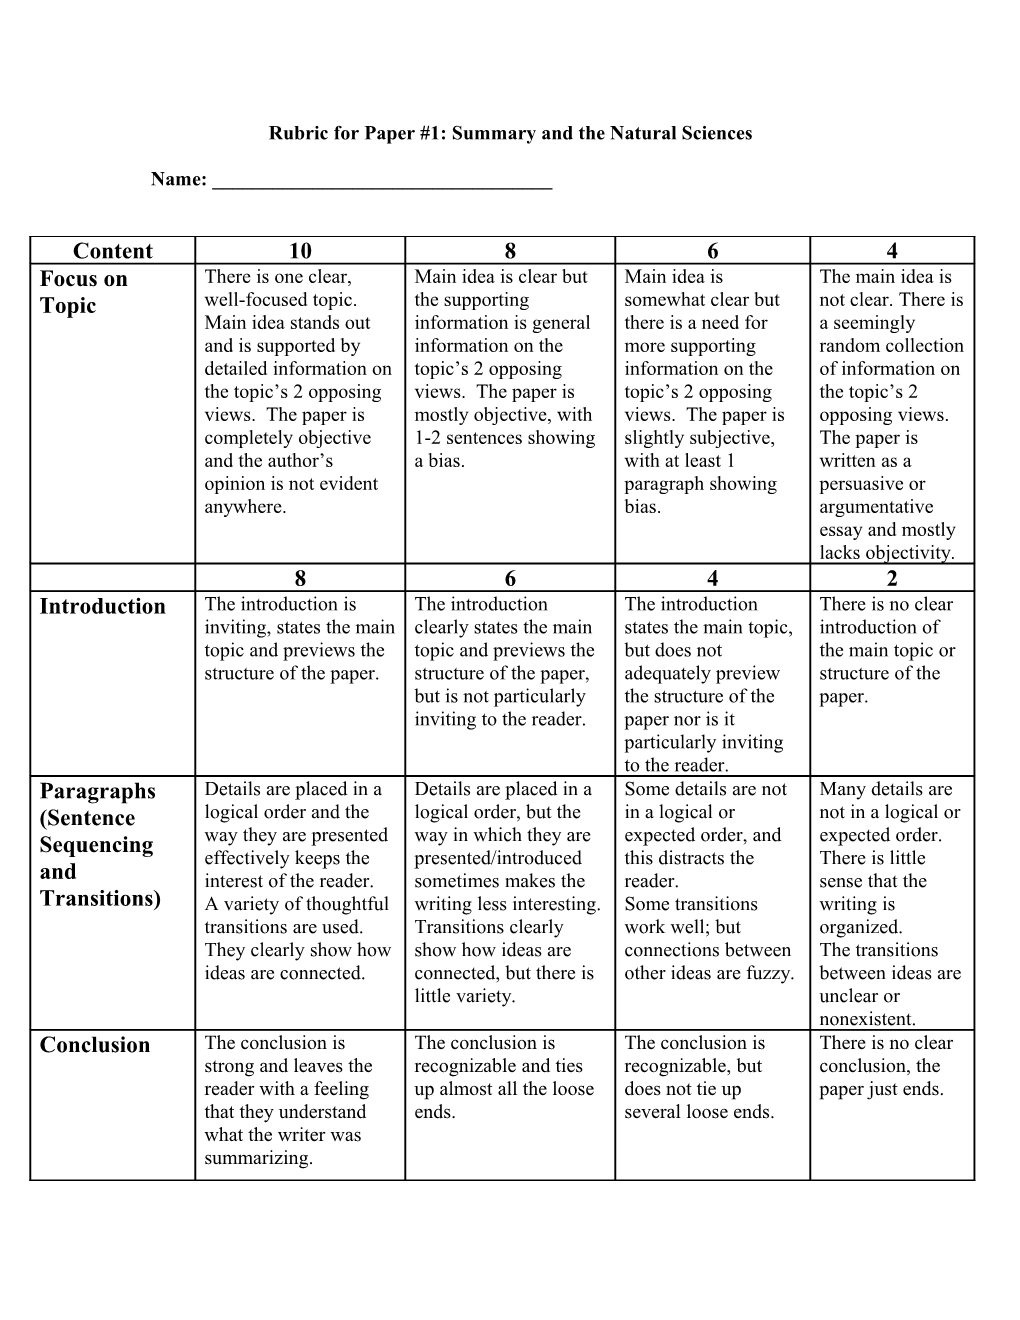 Rubric for Paper #1: Summary and the Natural Sciences